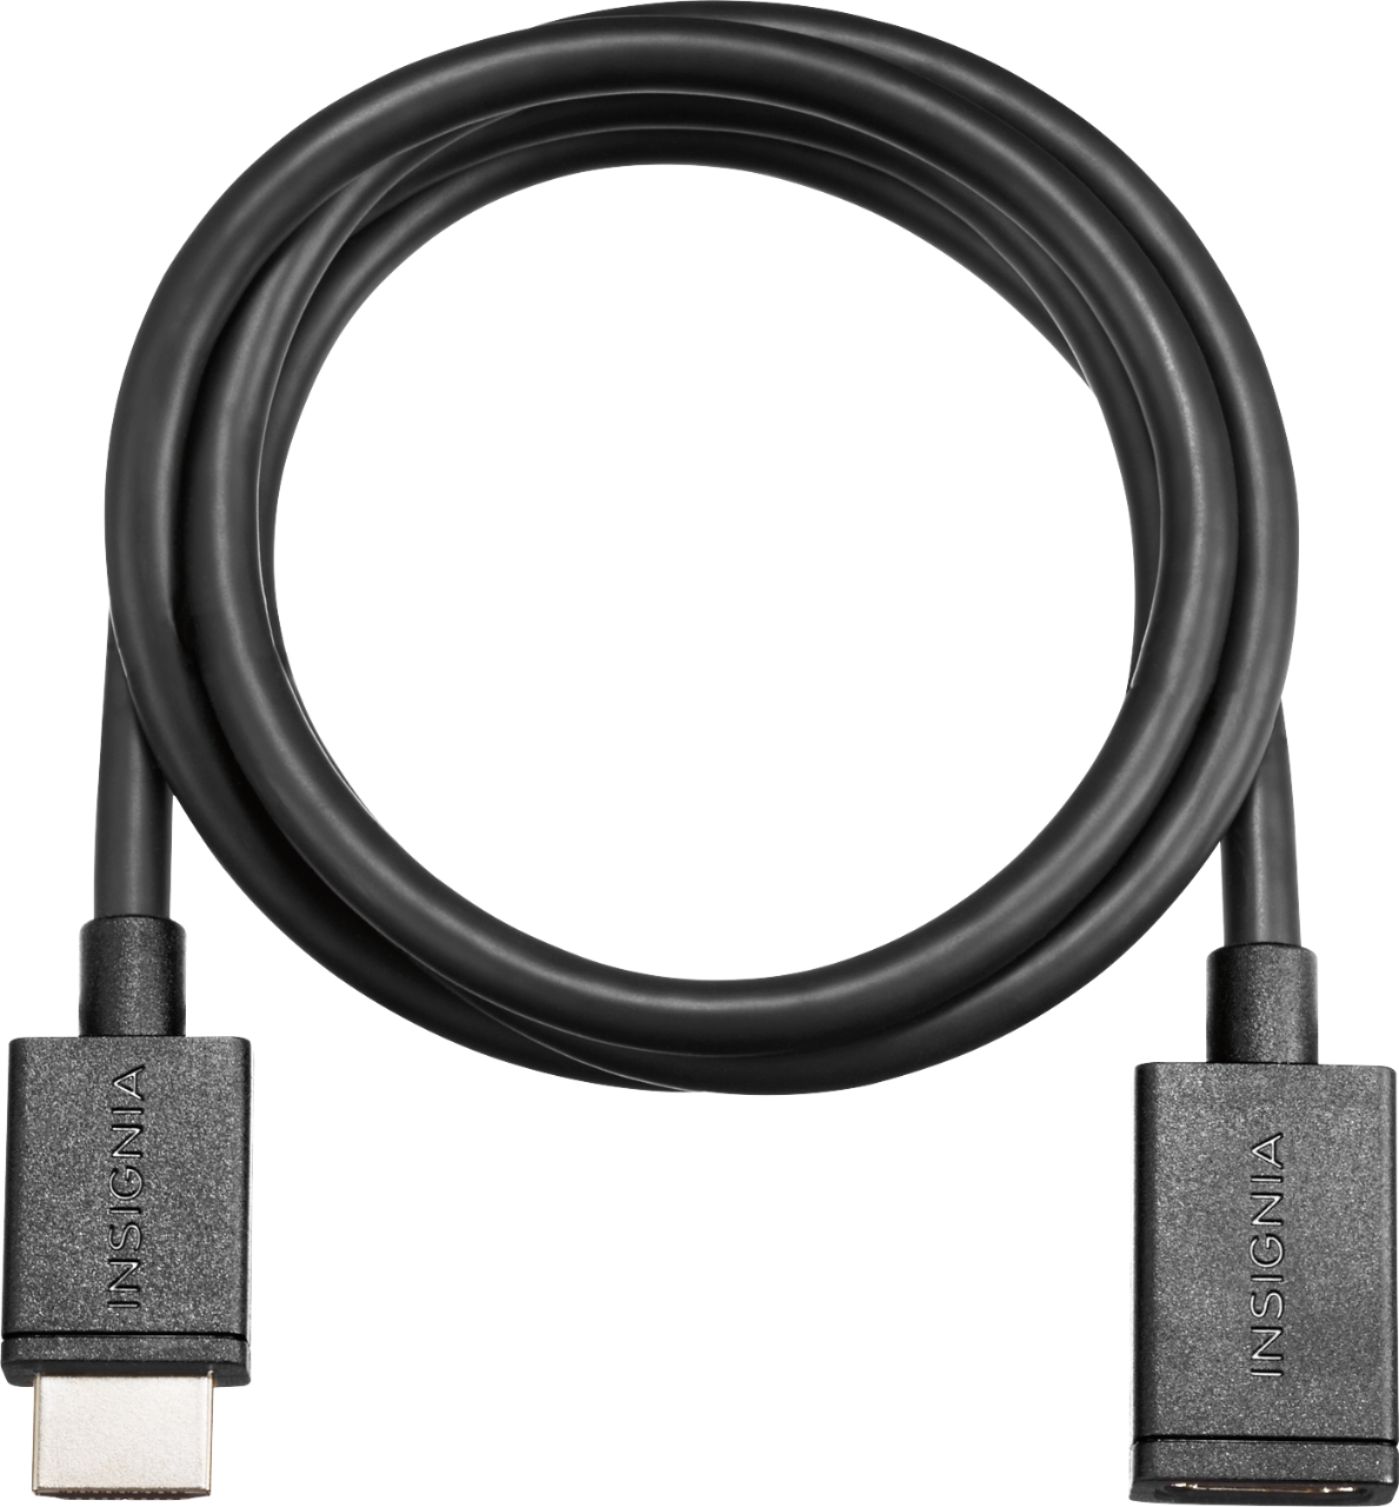 PAC 3' Dash-Mount USB and HDMI Extension Cable Black HDMI-USB-CBL - Best Buy